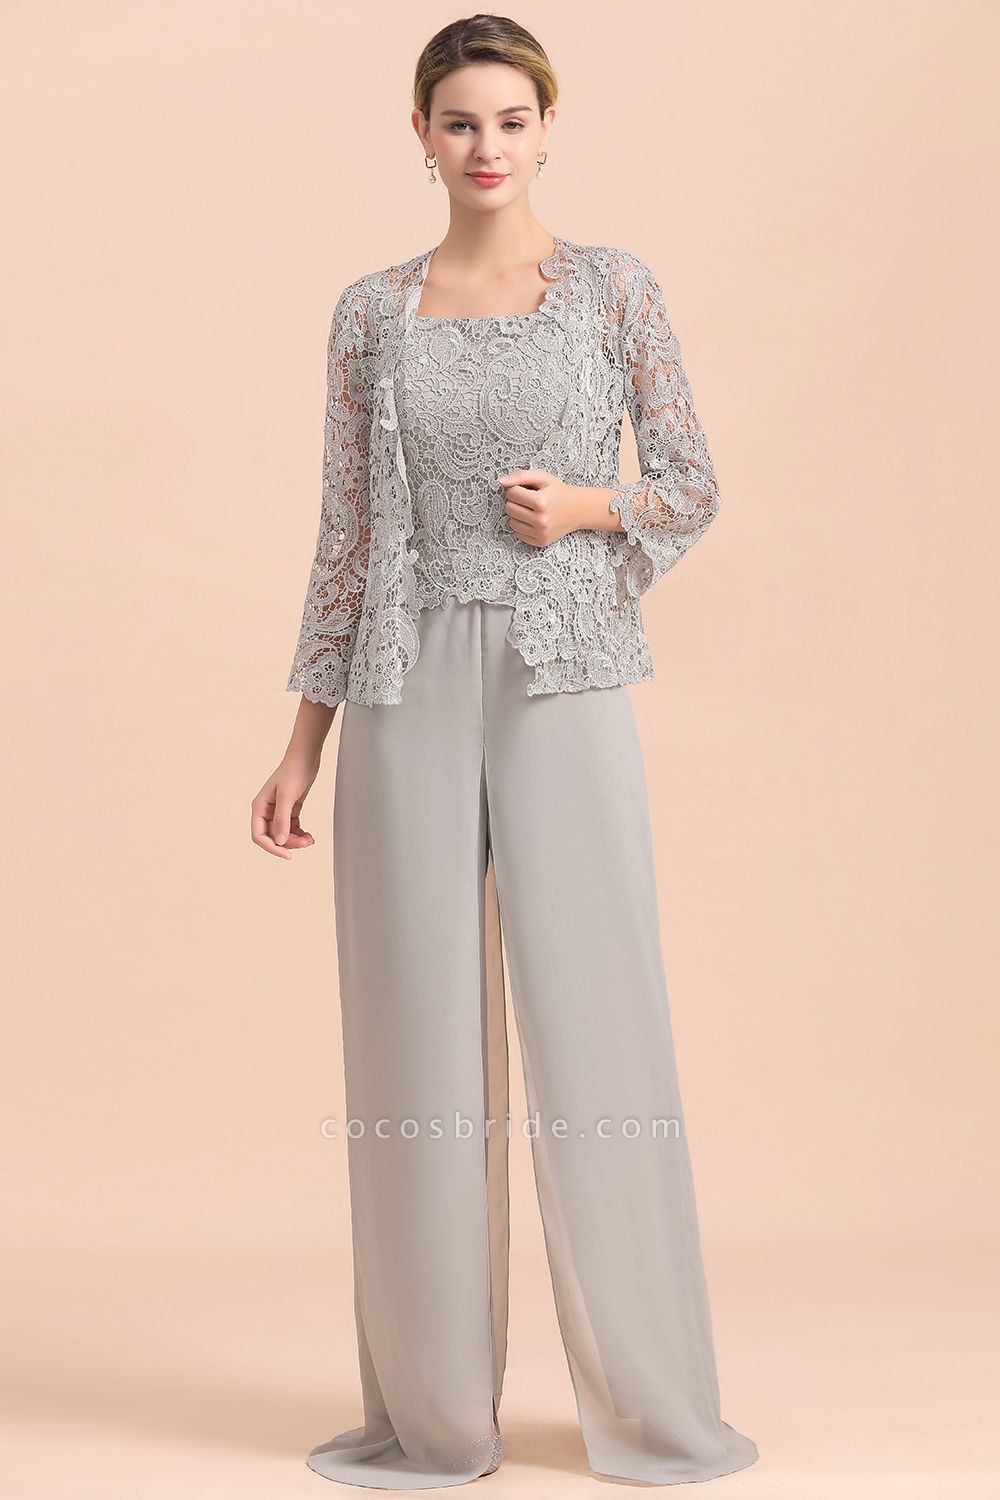 Chic Silver Lace Chiffon Long Sleeve Mother of Bride Jumpsuit With Wrap